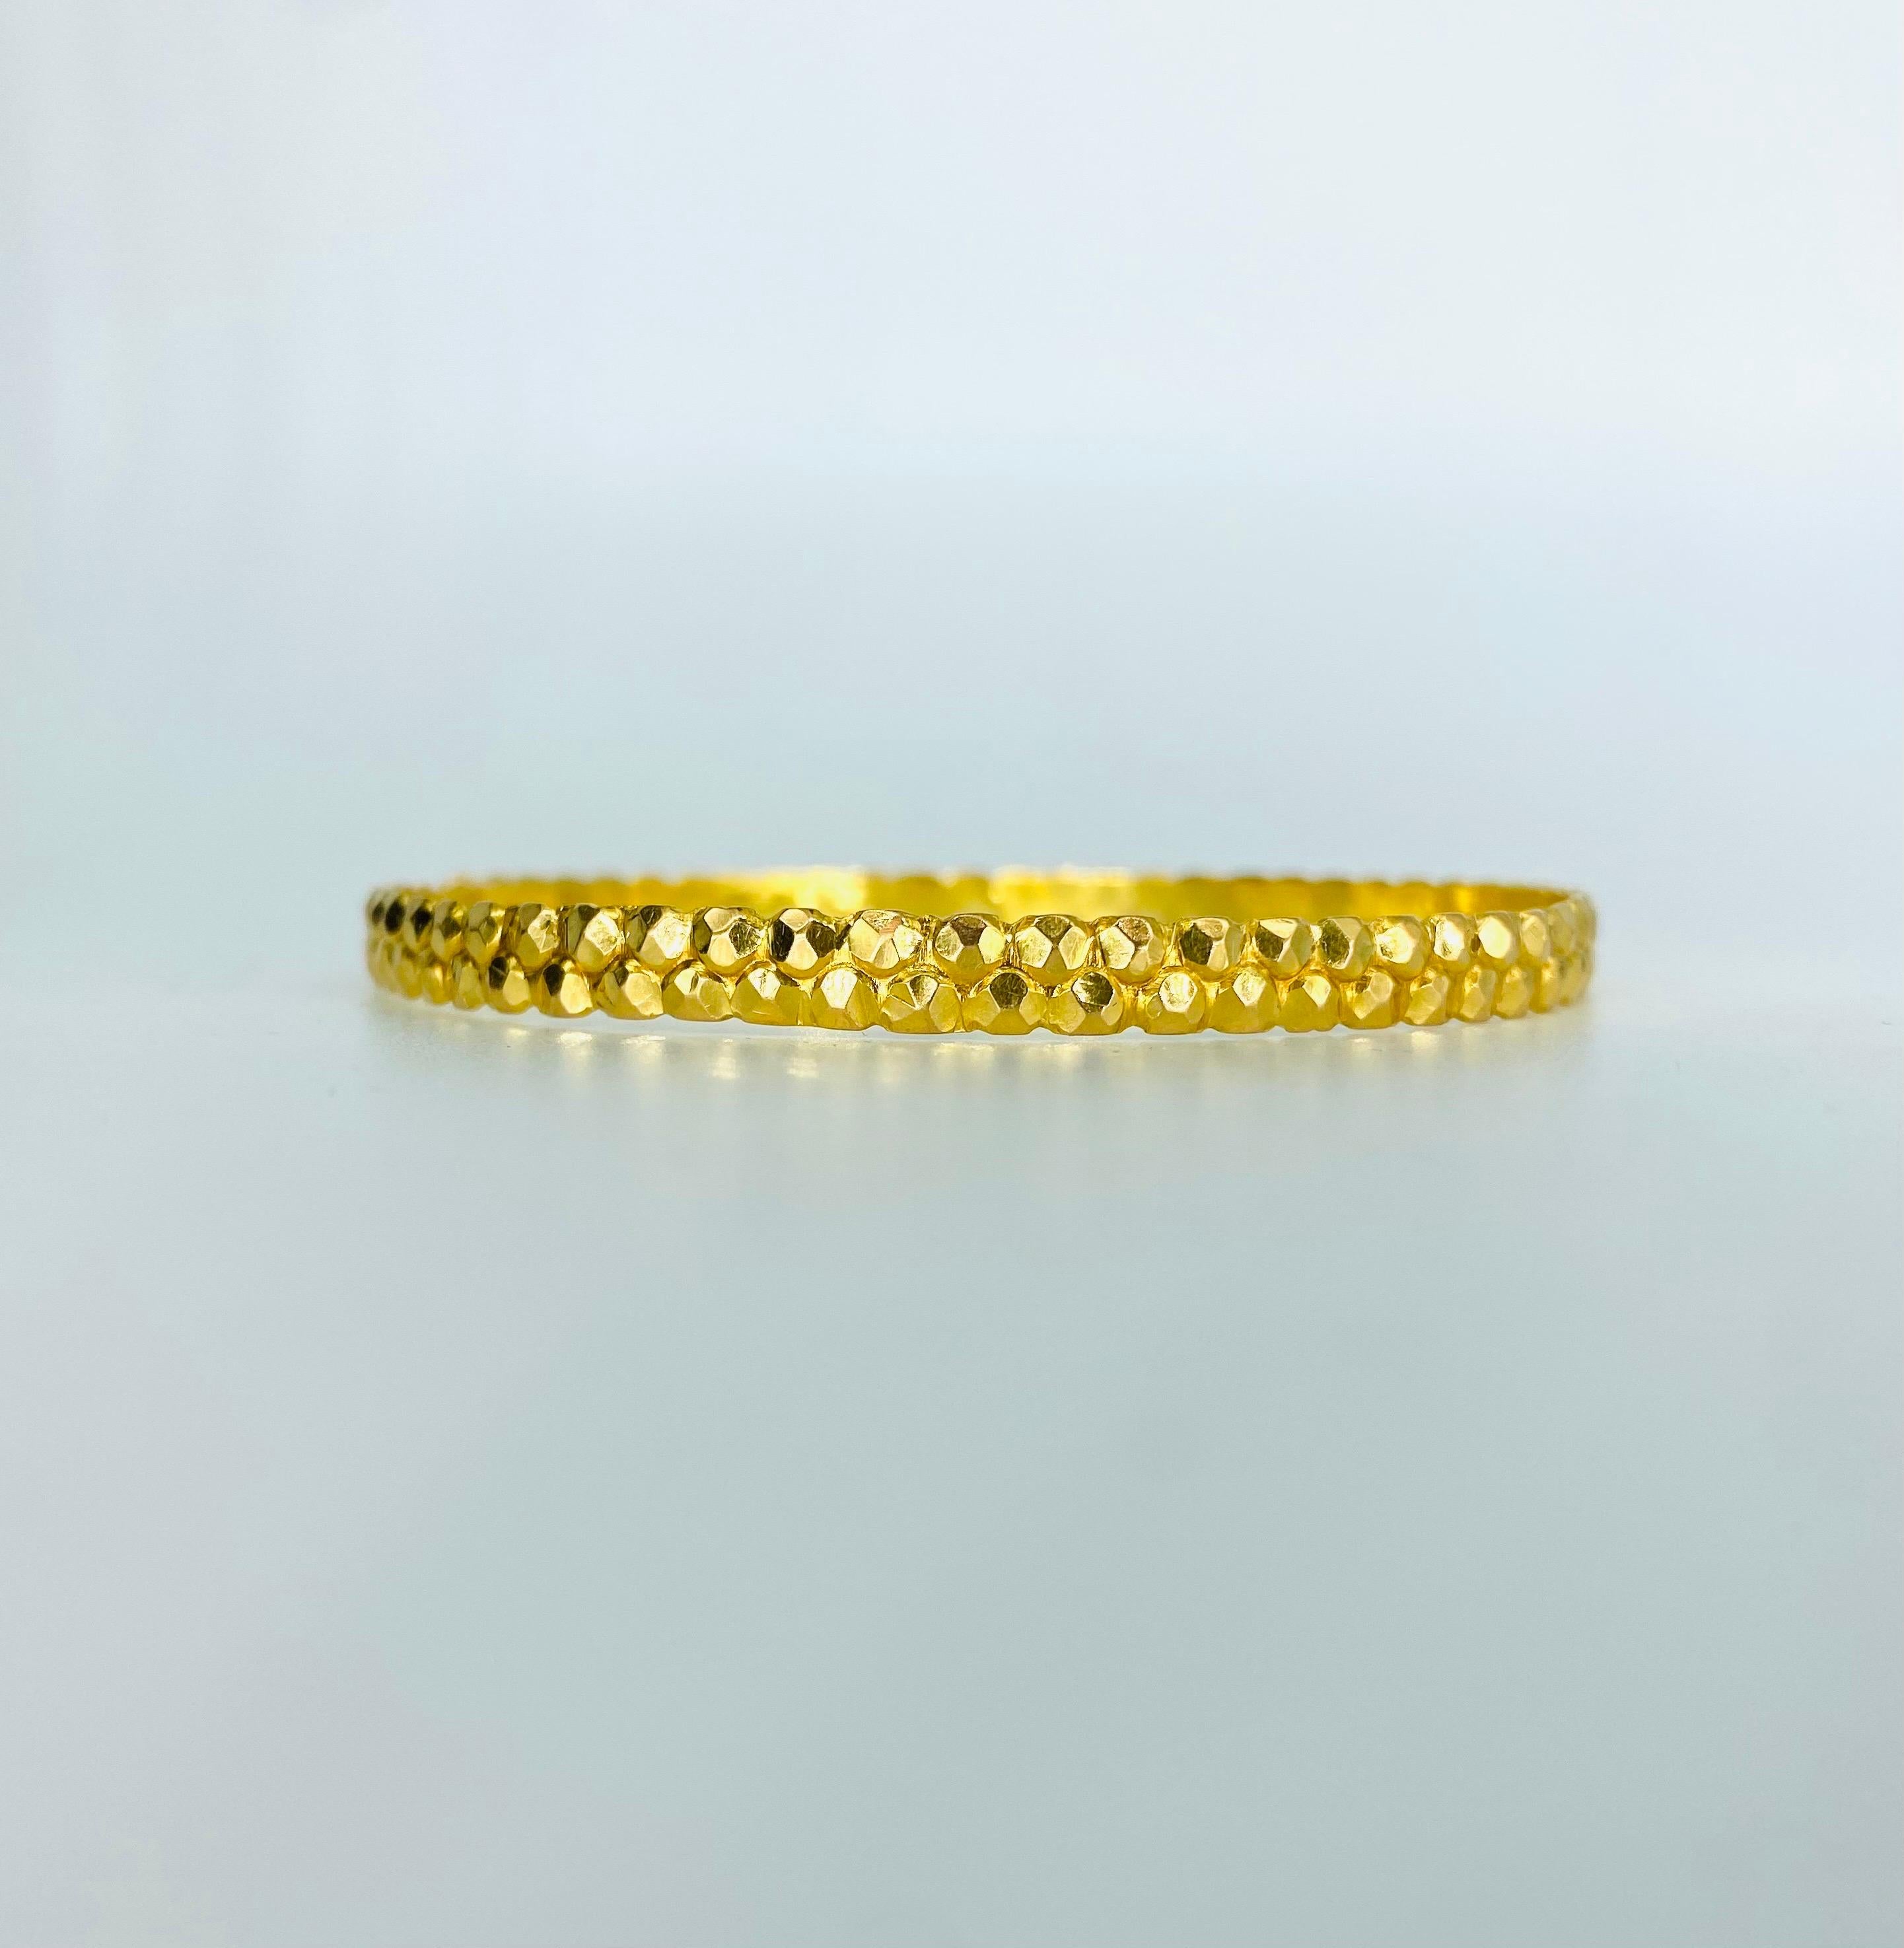 Antique 5.30mm 22k Solid Gold Nugget Design Bangle. The bangle measures 5.30mm wide and fits a wrist of 6.5 inches. The bangle weights 12.2 grams 21k gold.